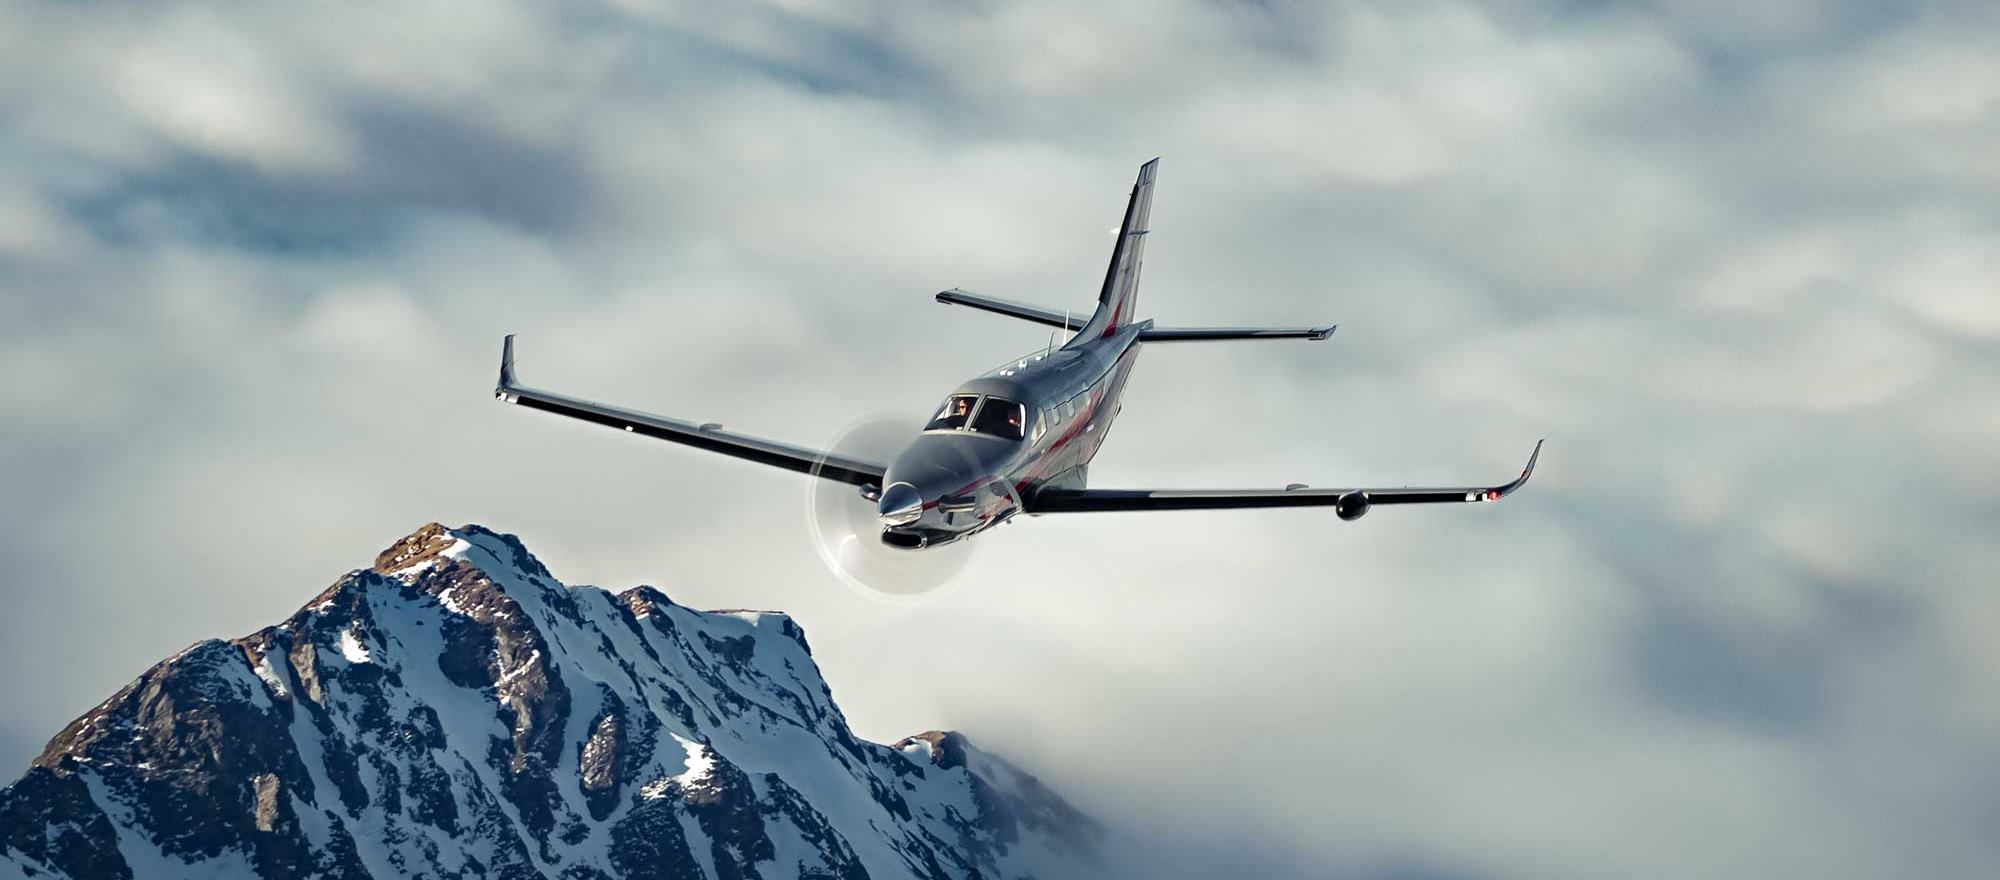 Daher TBM 960 in flight over snow capped mountains